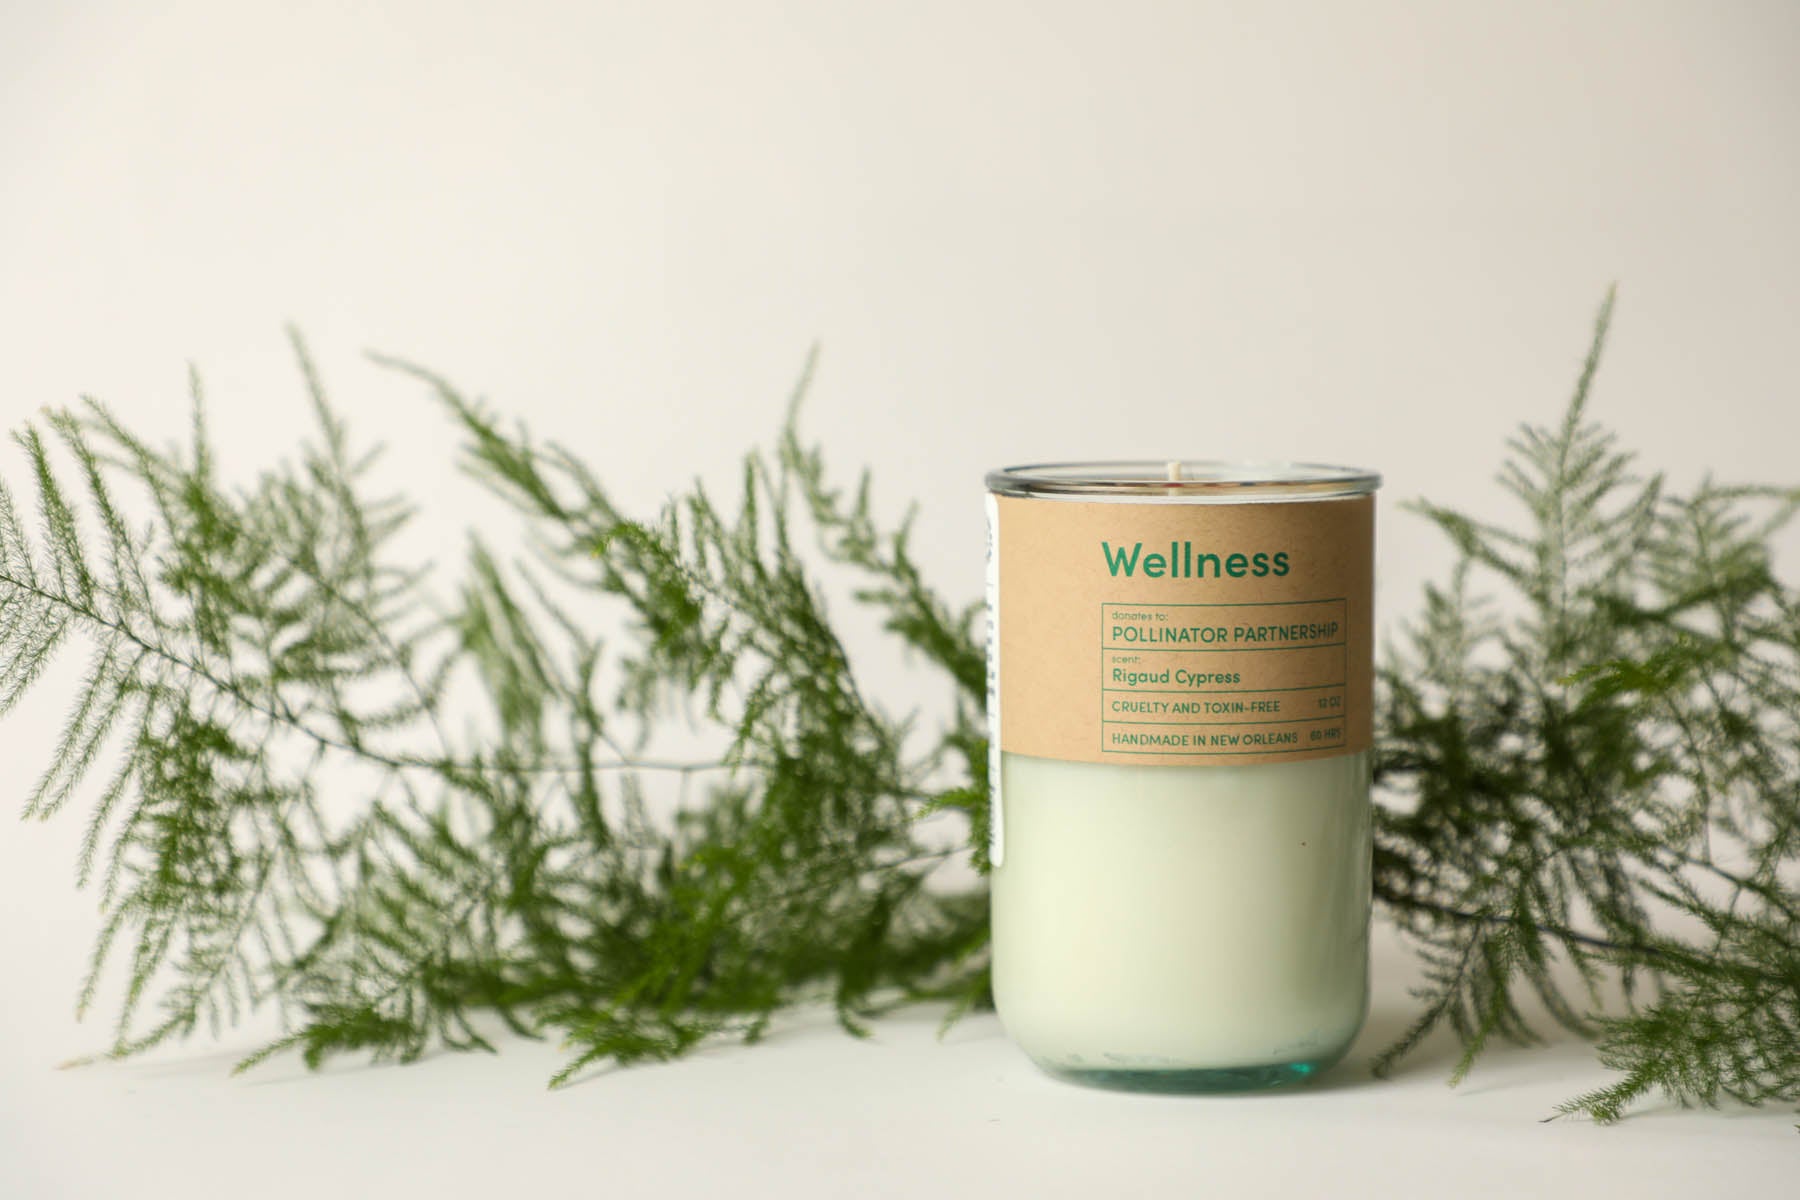 Wellness / Rigaud Cypress Scent: Candles for Good